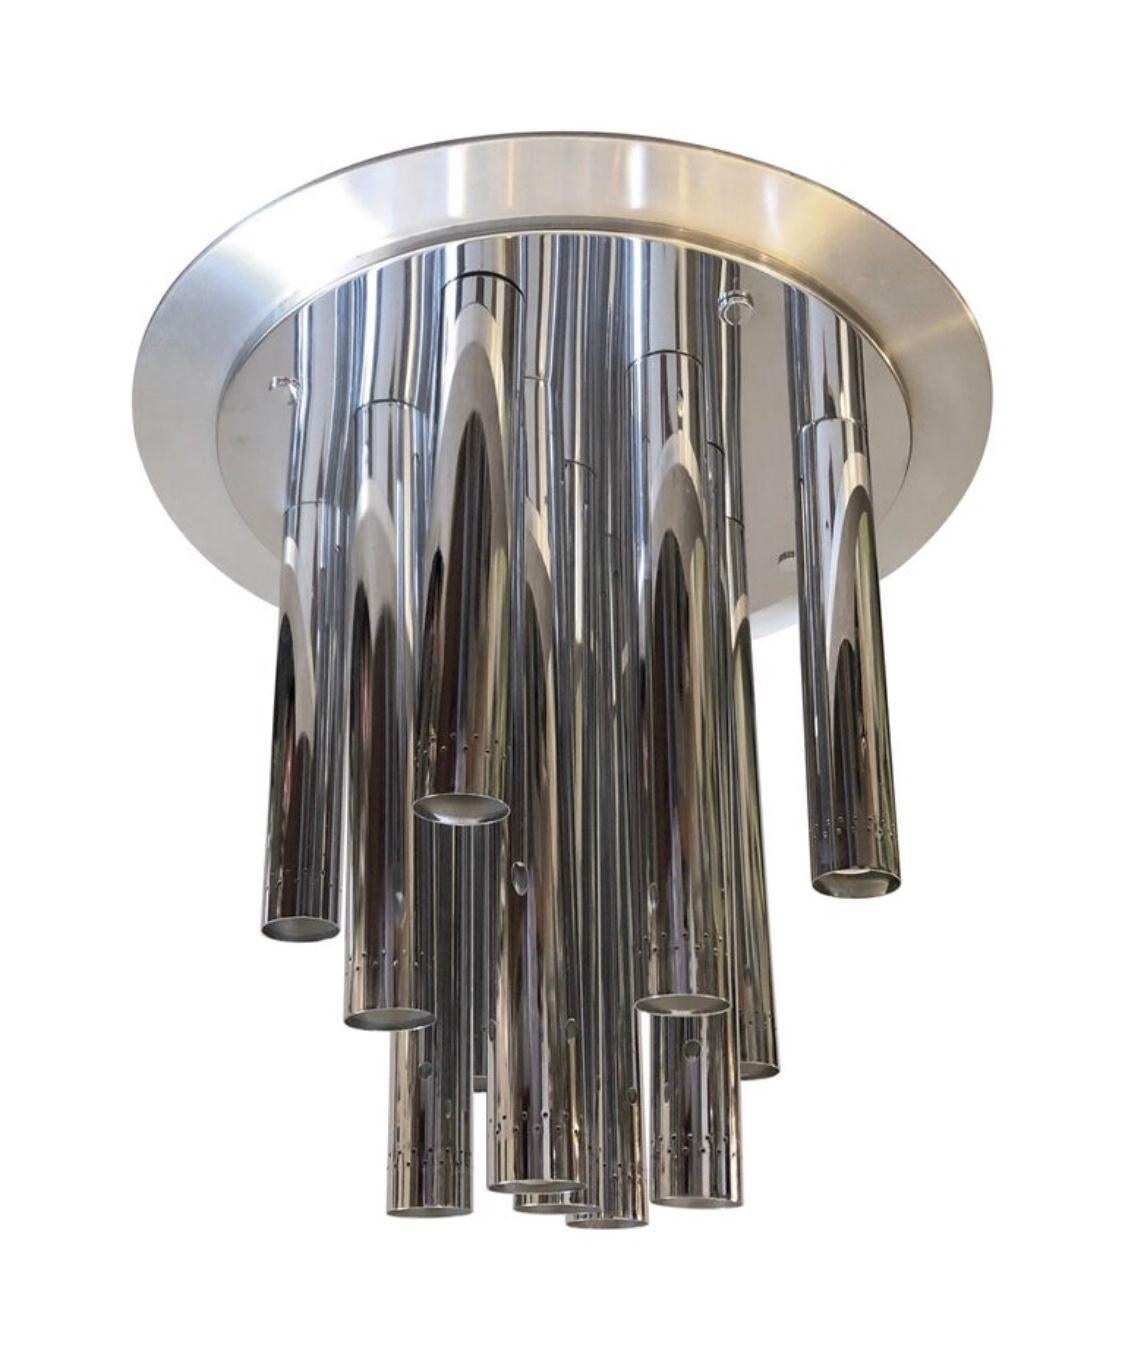 This Space Age steel and chrome Italian chandelier can be used also as a table lamp. It works 110-240 Volts and need 13 regular e27 bulbs.